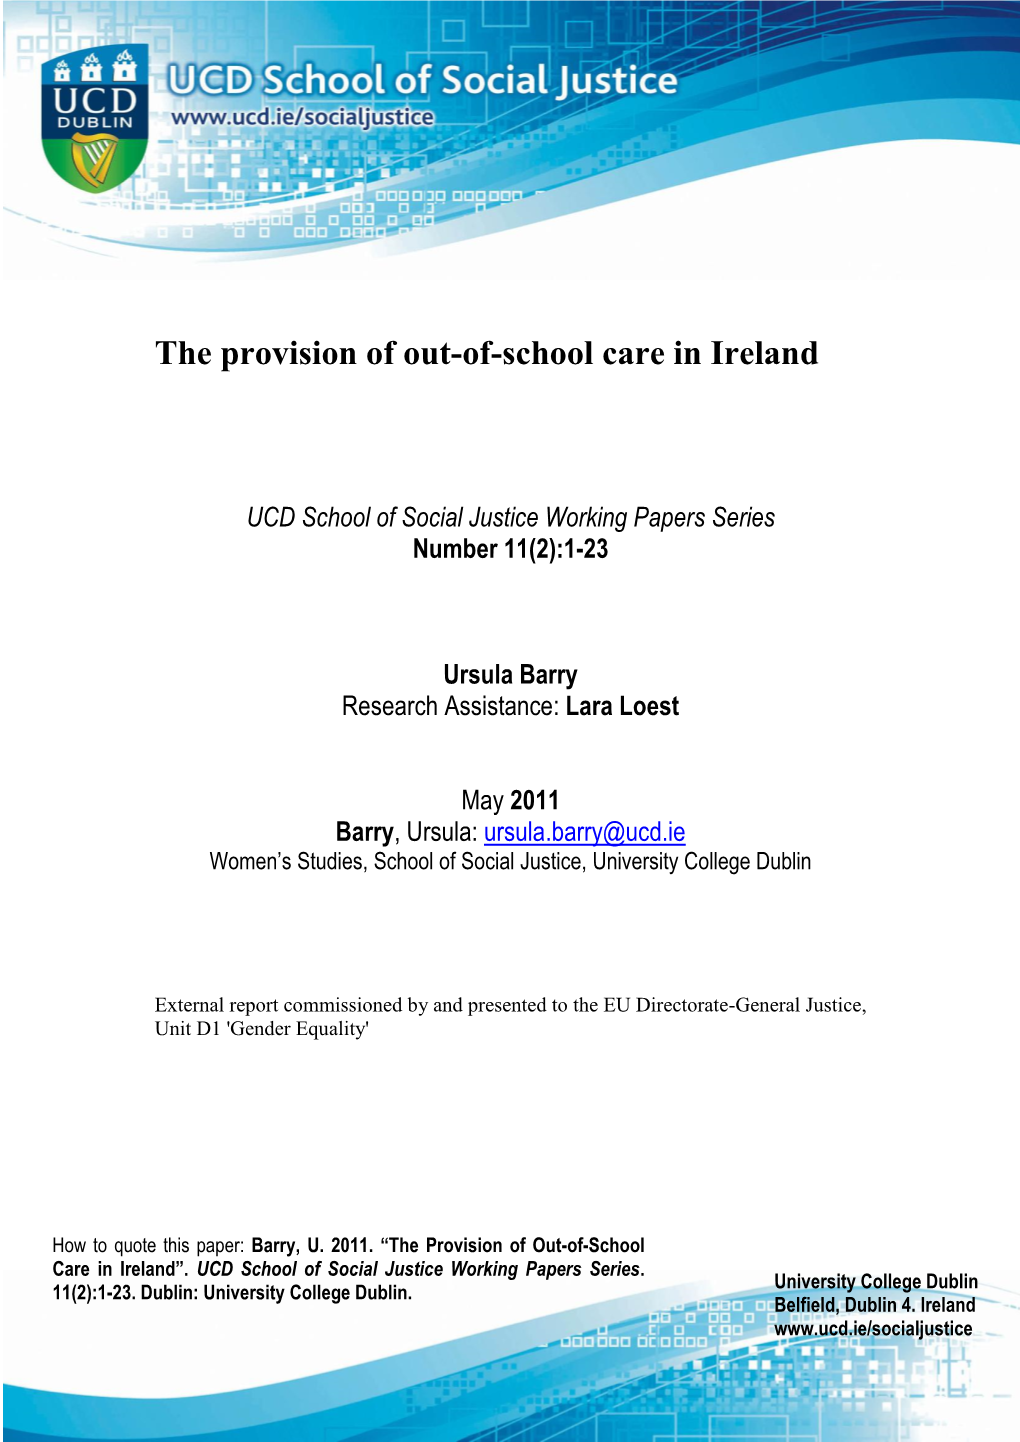 The Provision of Out-Of-School Care in Ireland